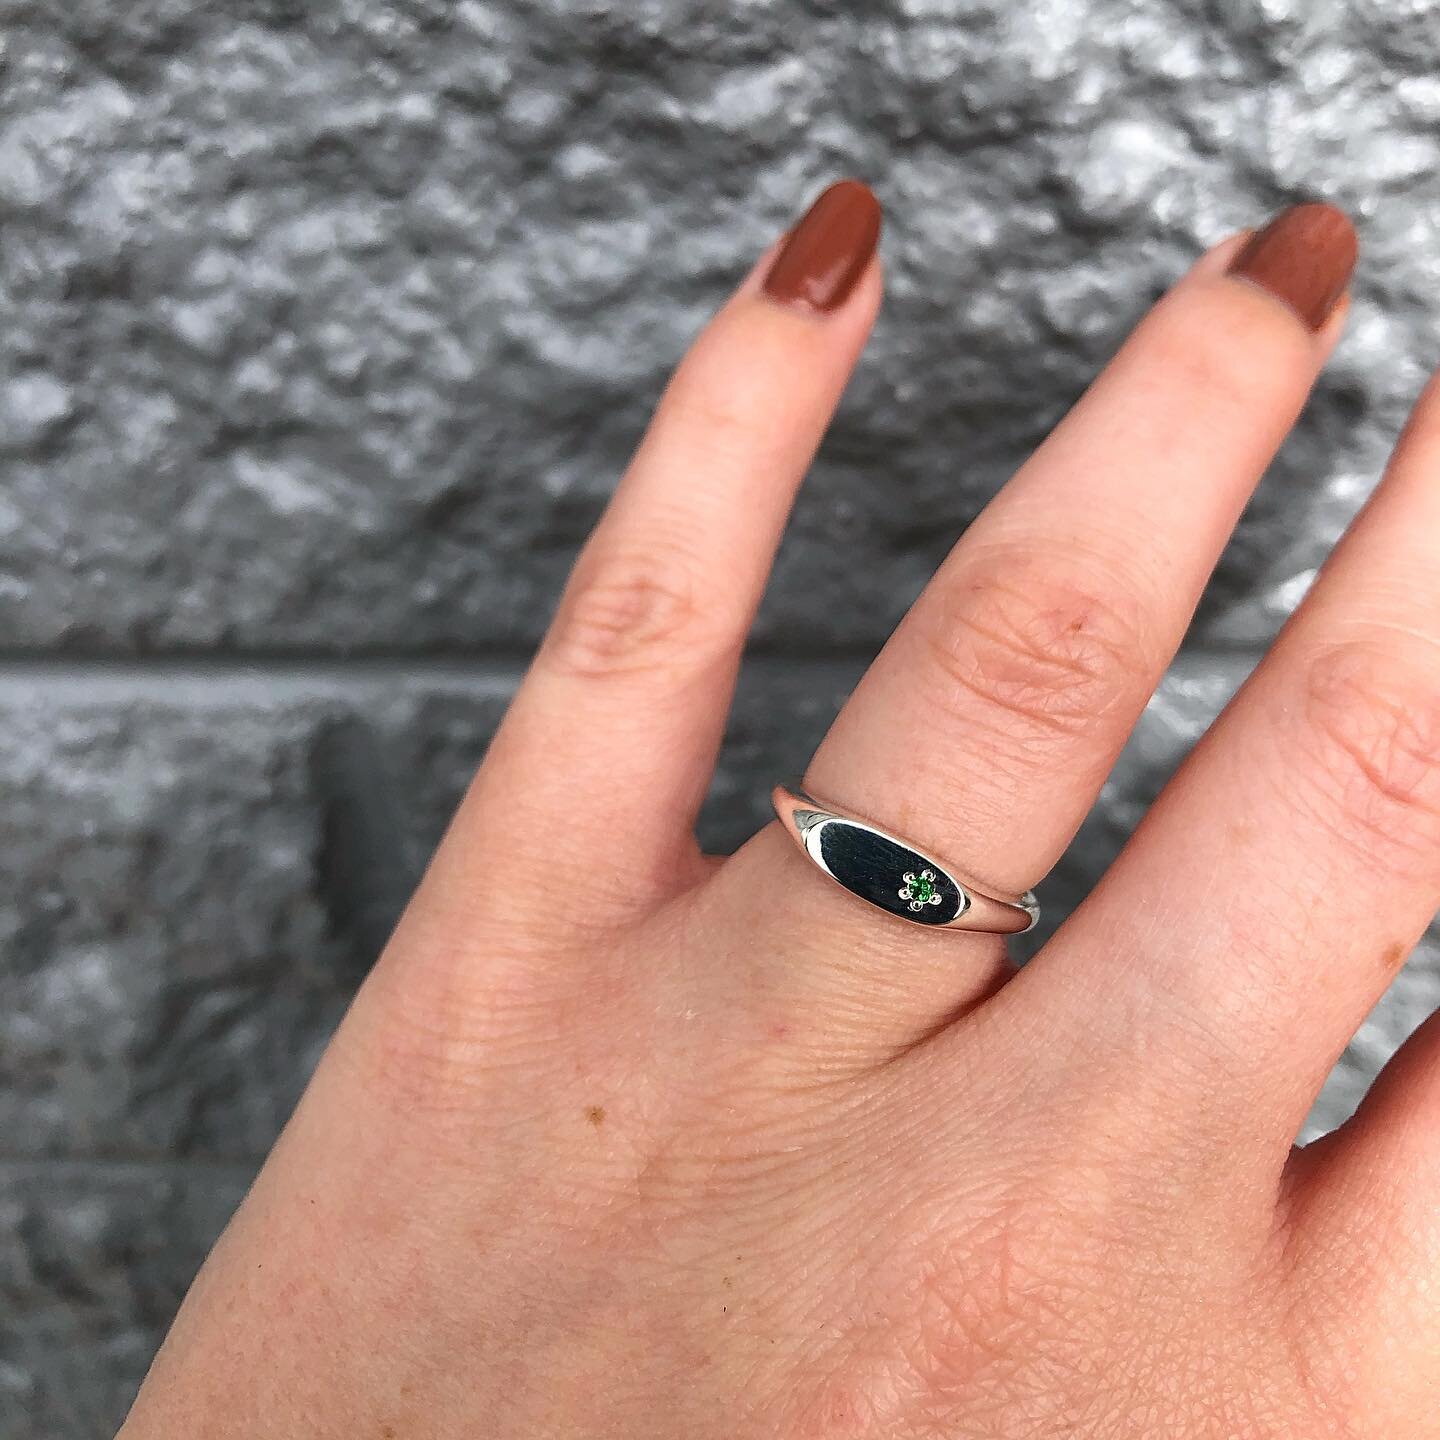 We have one of these mini &ldquo;Mum&rdquo; rings left in stock online along with a few other beautiful pieces! I won&rsquo;t be adding any more stock onto the website until the new year so get in quick if you are wanting something this year 💚💚